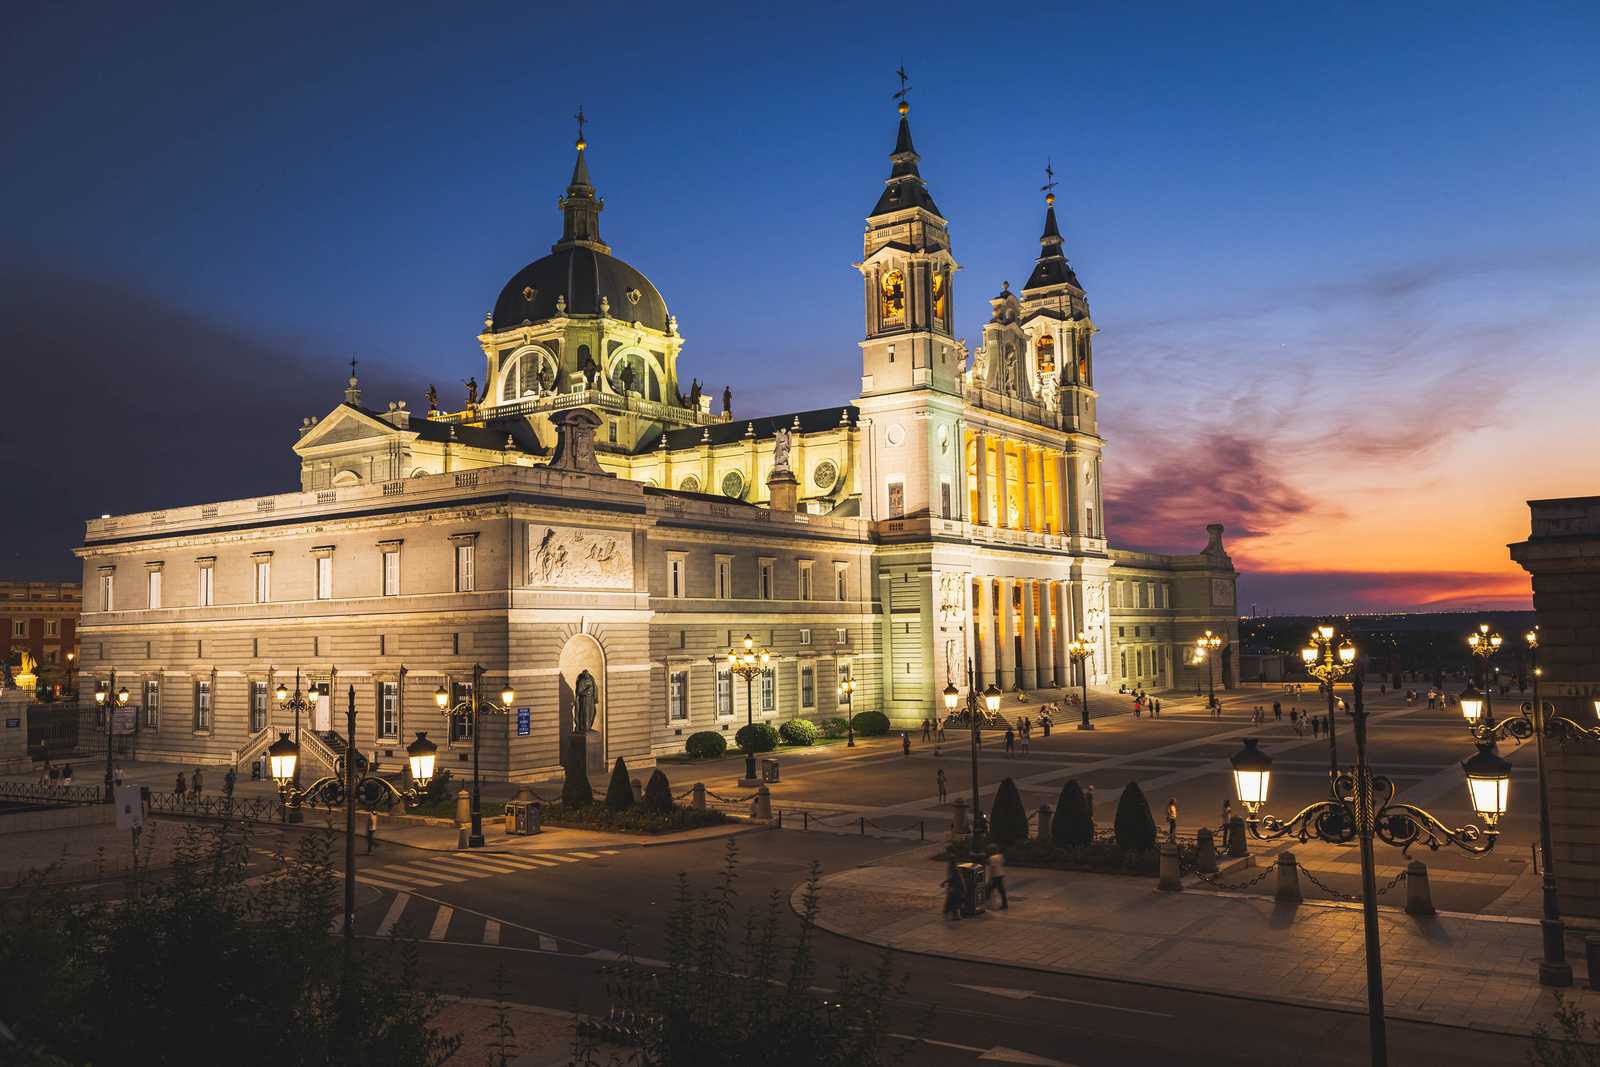 A photo of the Catedral de la Almudena and plaza in Madrid during the sunset